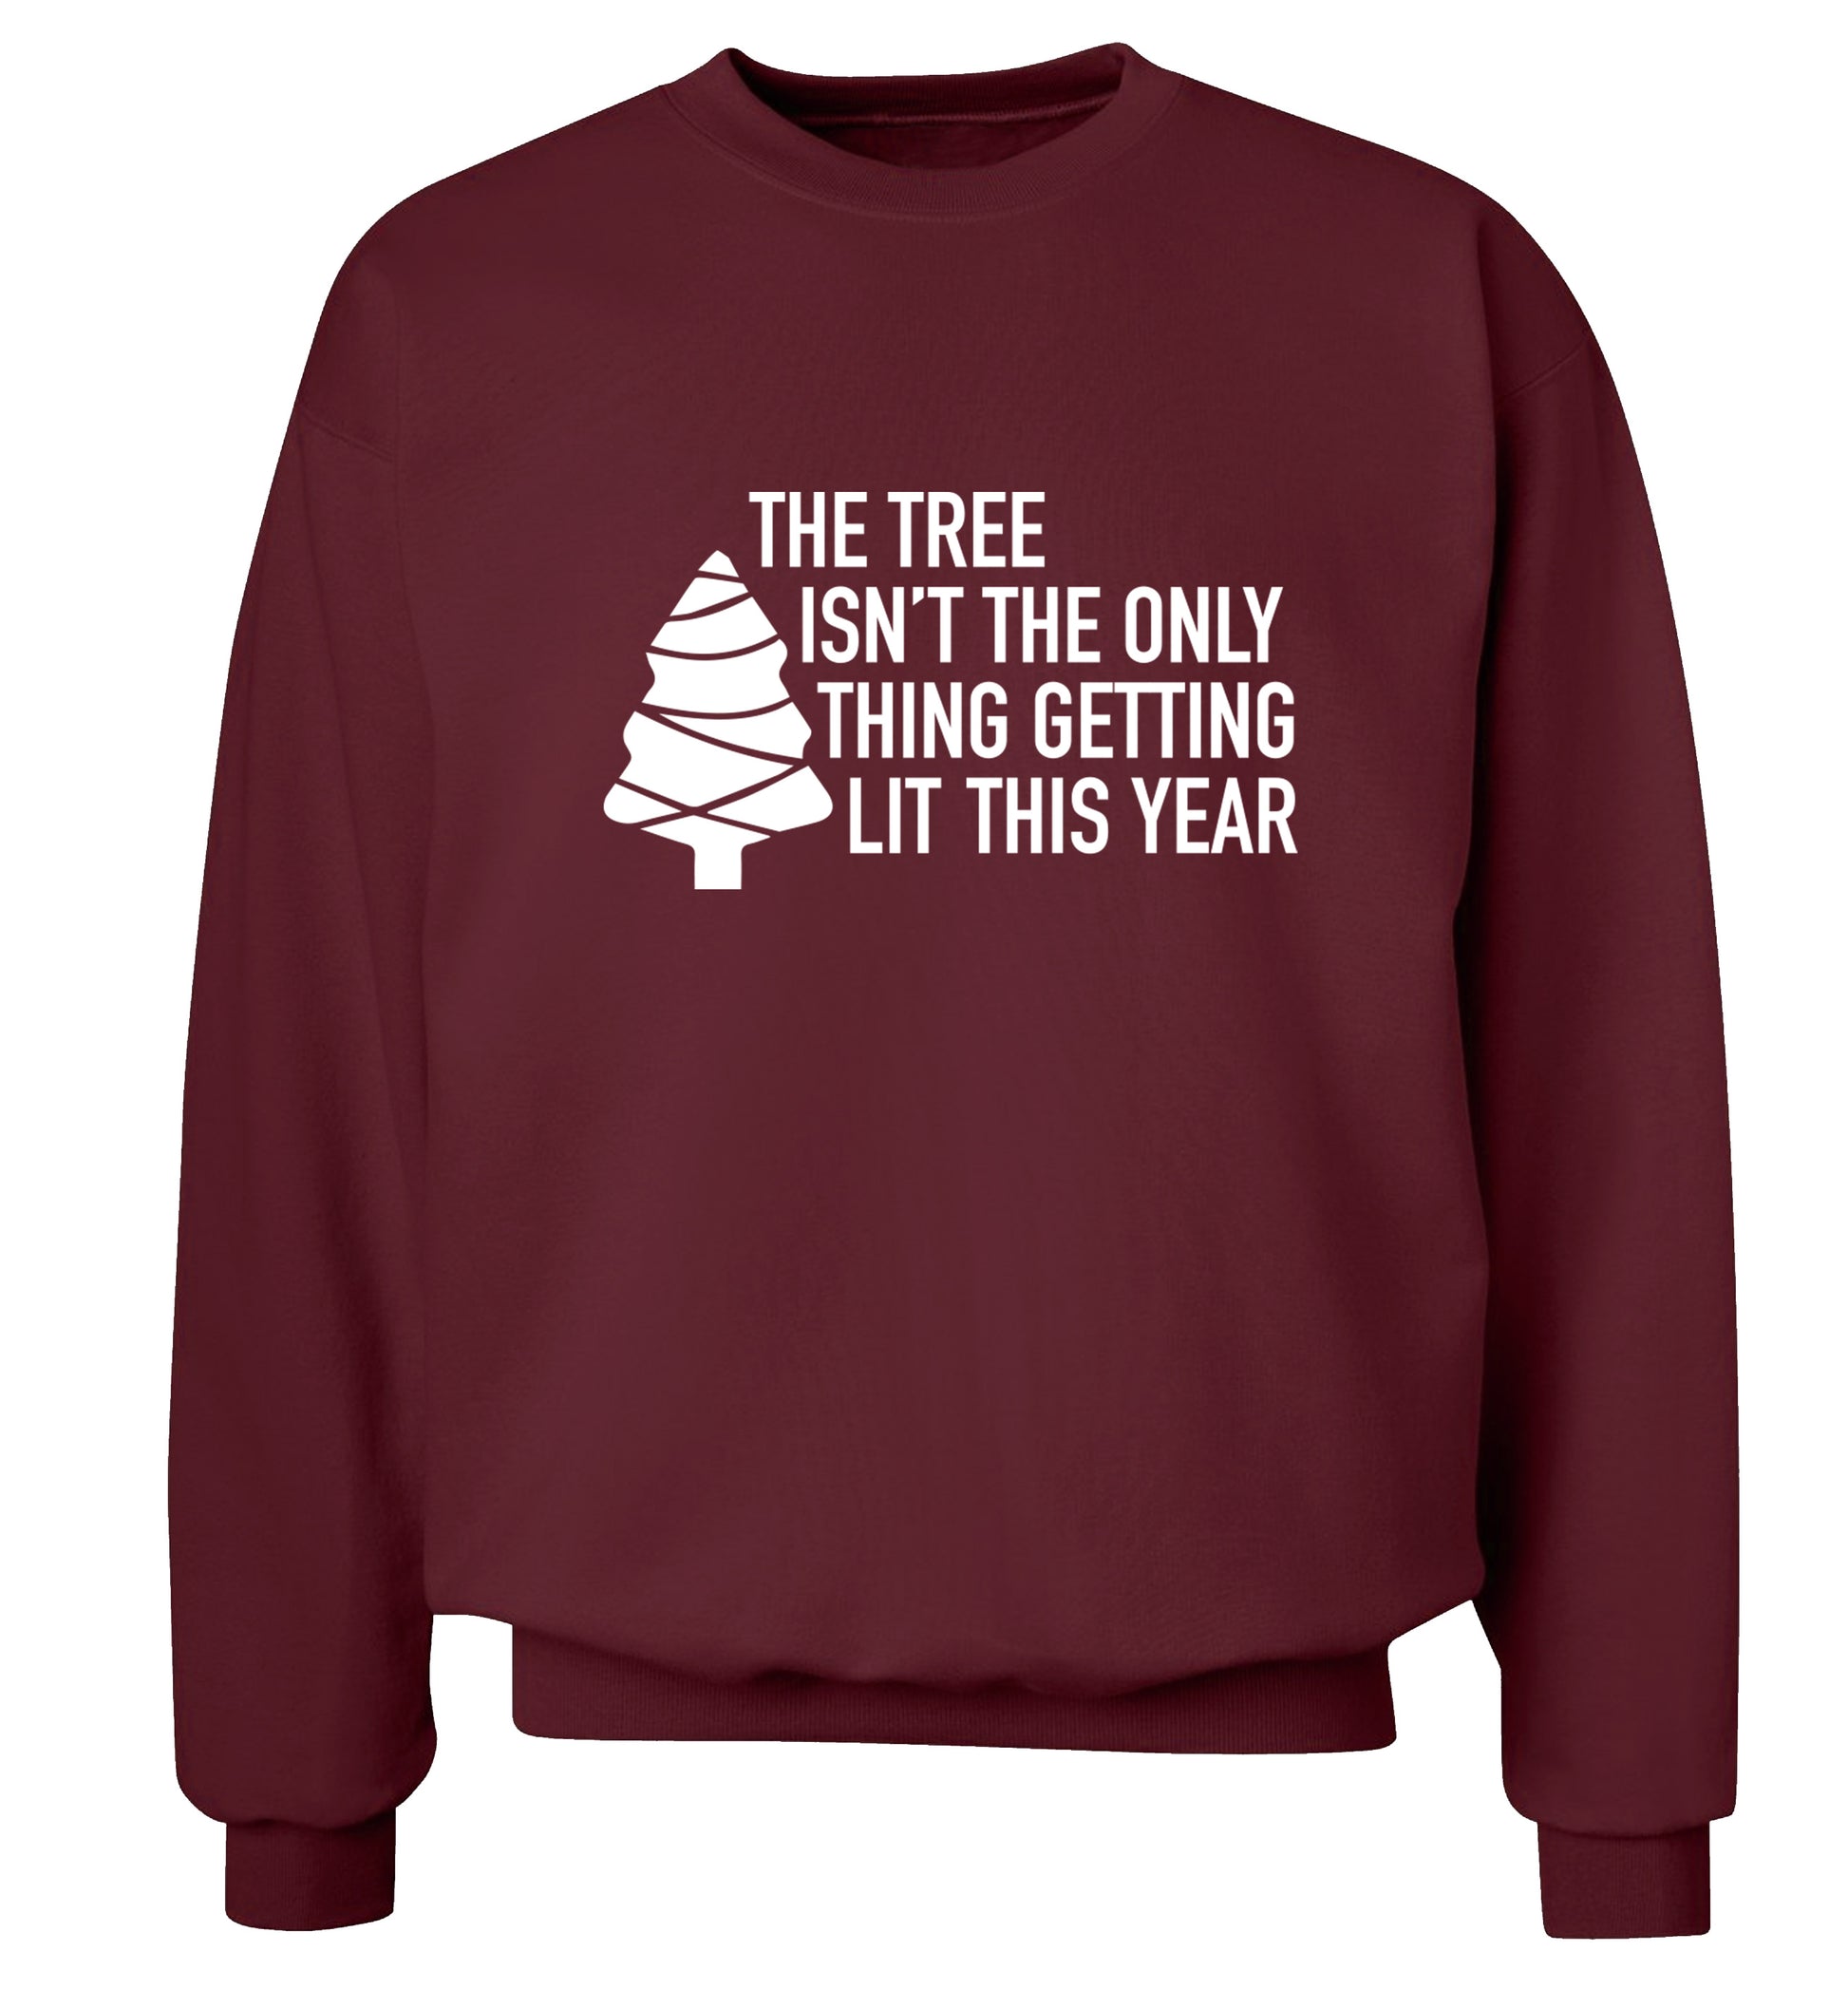 The tree isn't the only thing getting lit this year Adult's unisex maroon Sweater 2XL